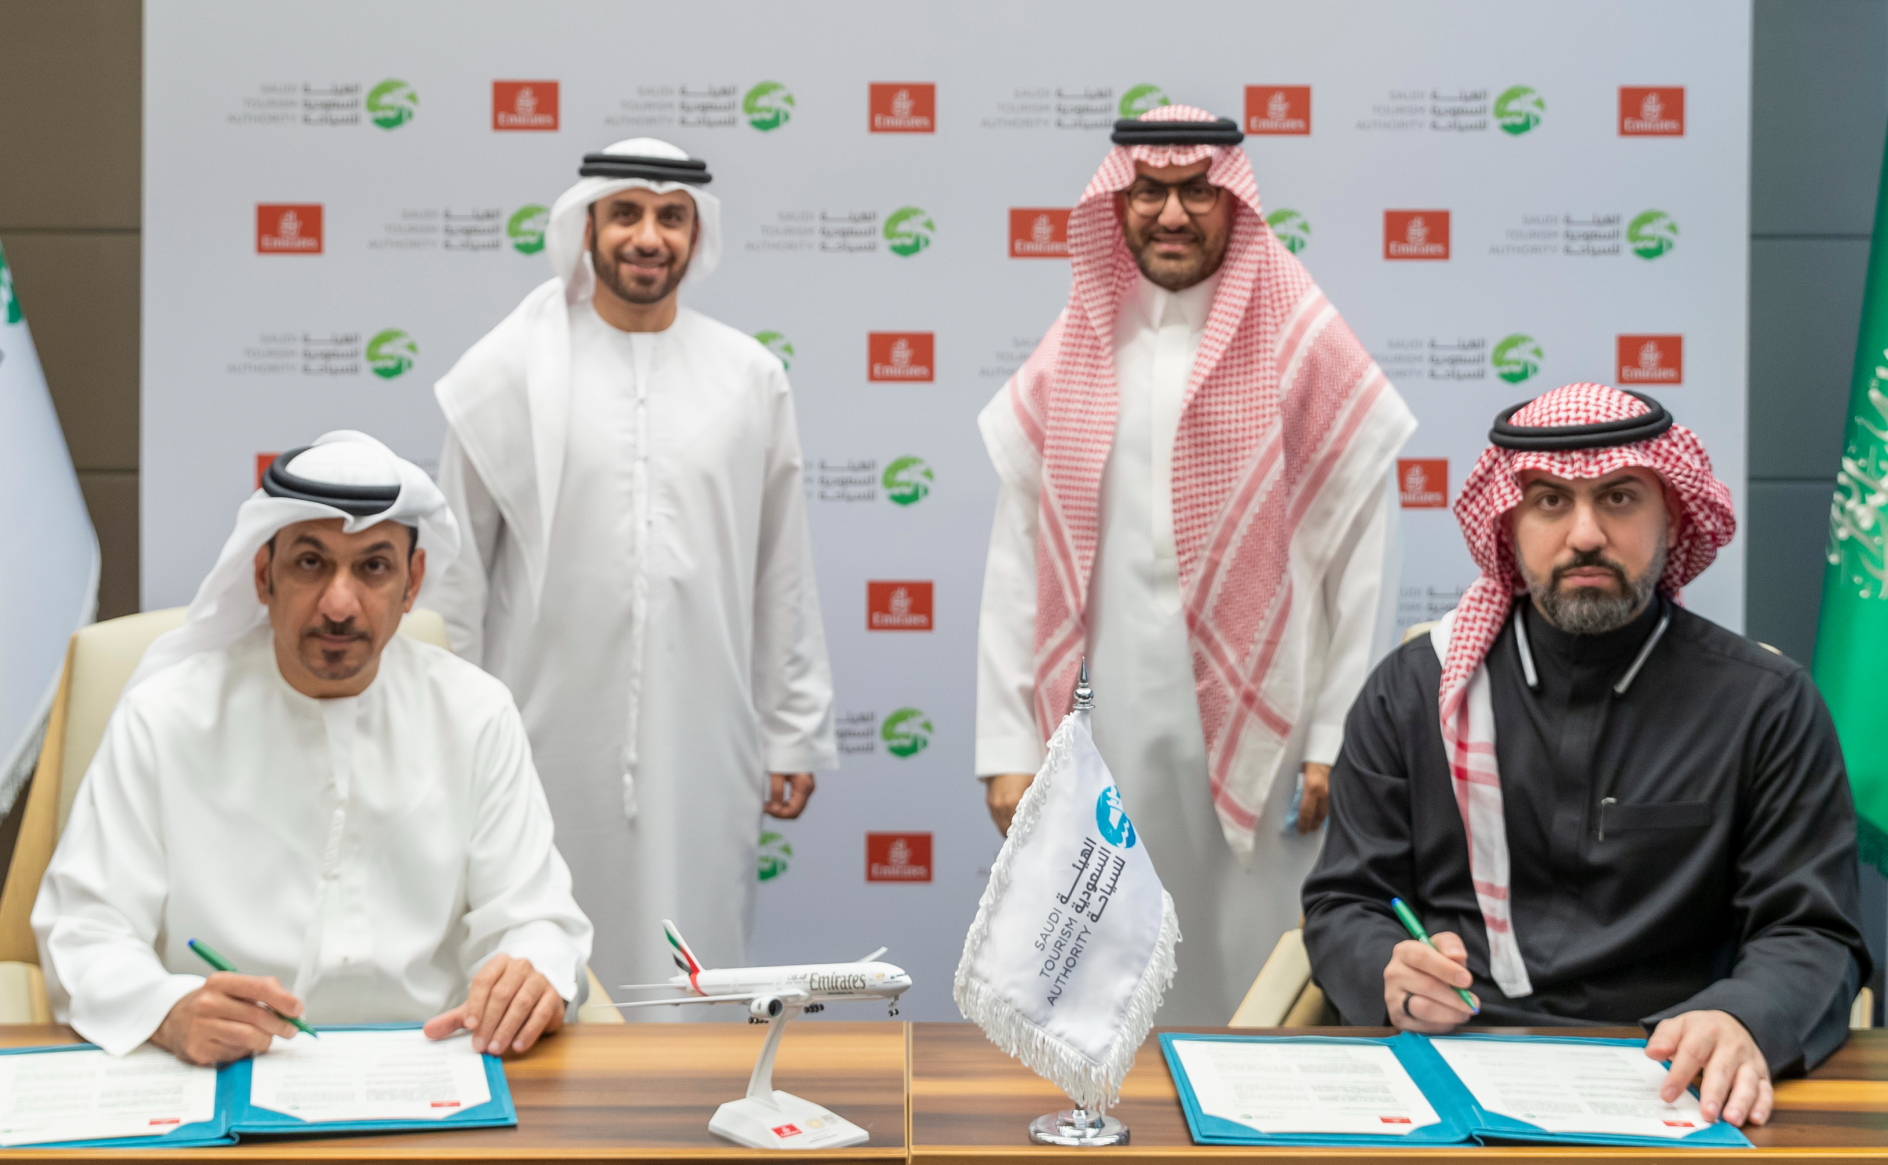 The MOU was signed by Adil Al Ghaith (left), Emirates' Senior Vice President Commercial Operations, Gulf, Middle East and Central Asia, and Muhammad Bassrawi, VP of the Saudi Tourism Authority, in the presence of Mr. Fahd Hamidaddin, CEO and Board Member of the Saudi Tourism Authority and Adnan Kazim, Emirates’ Chief Commercial Officer.. Click to enlarge.